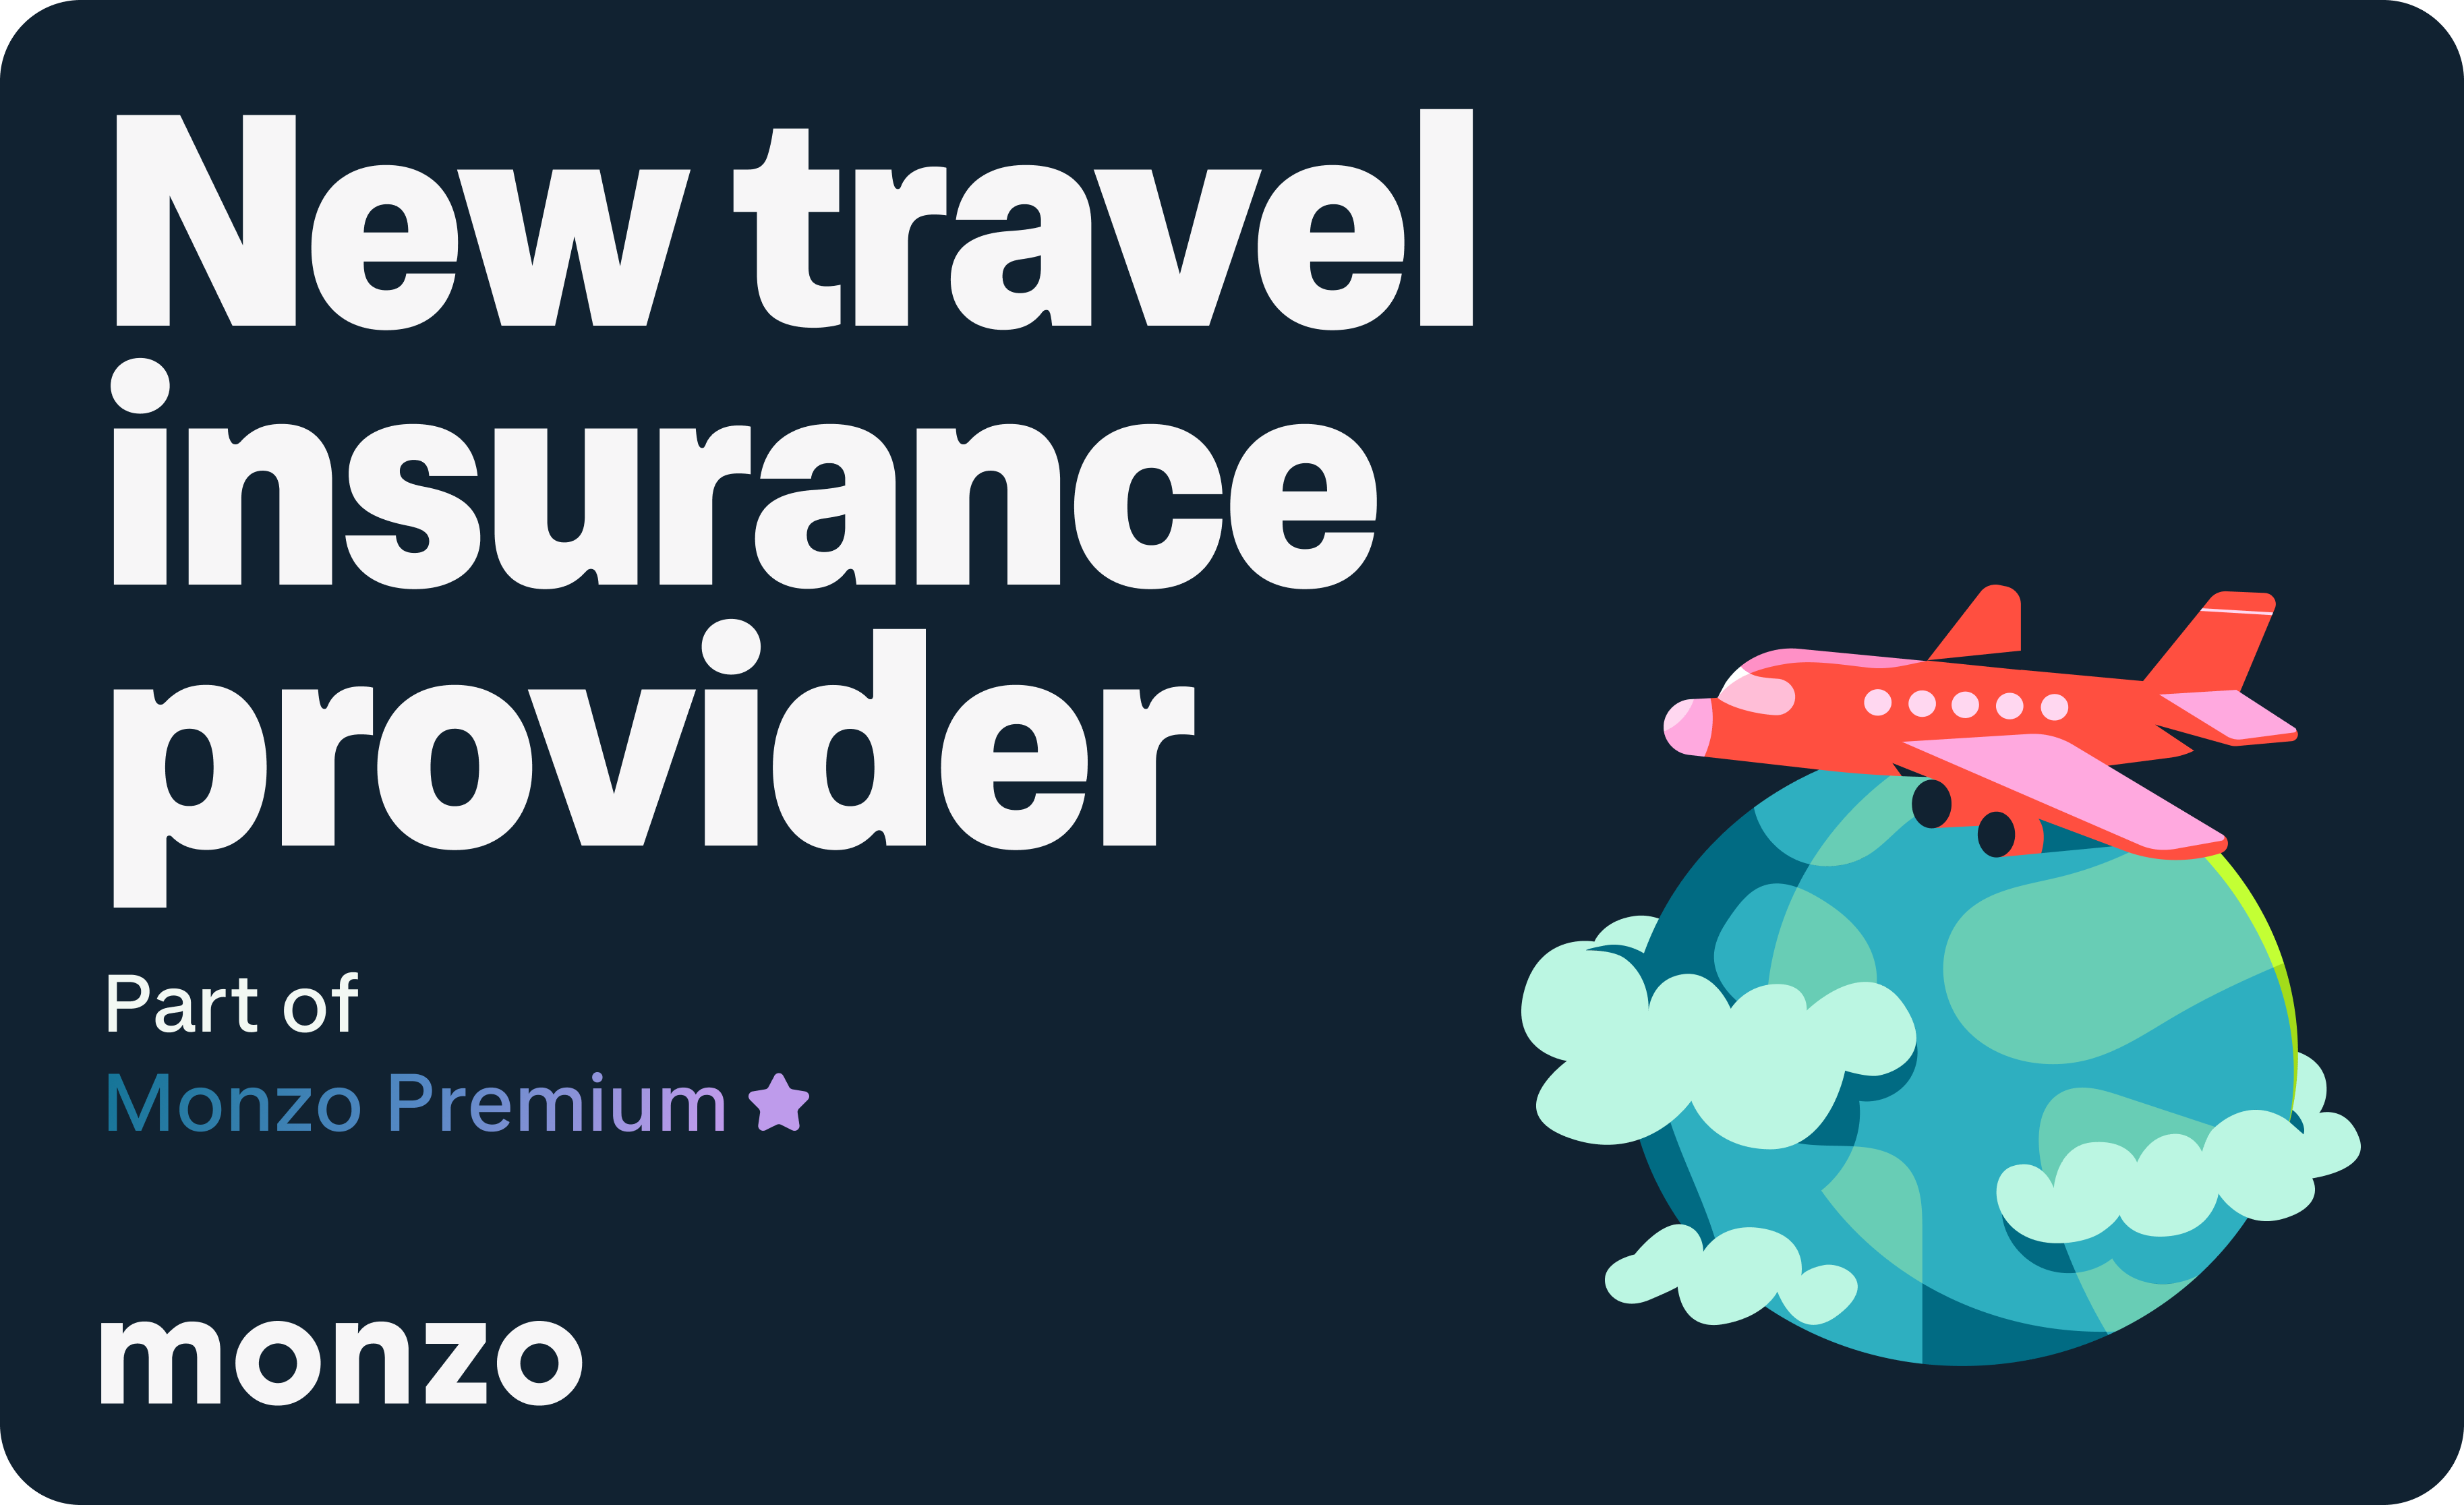 monzo premium travel insurance who is covered